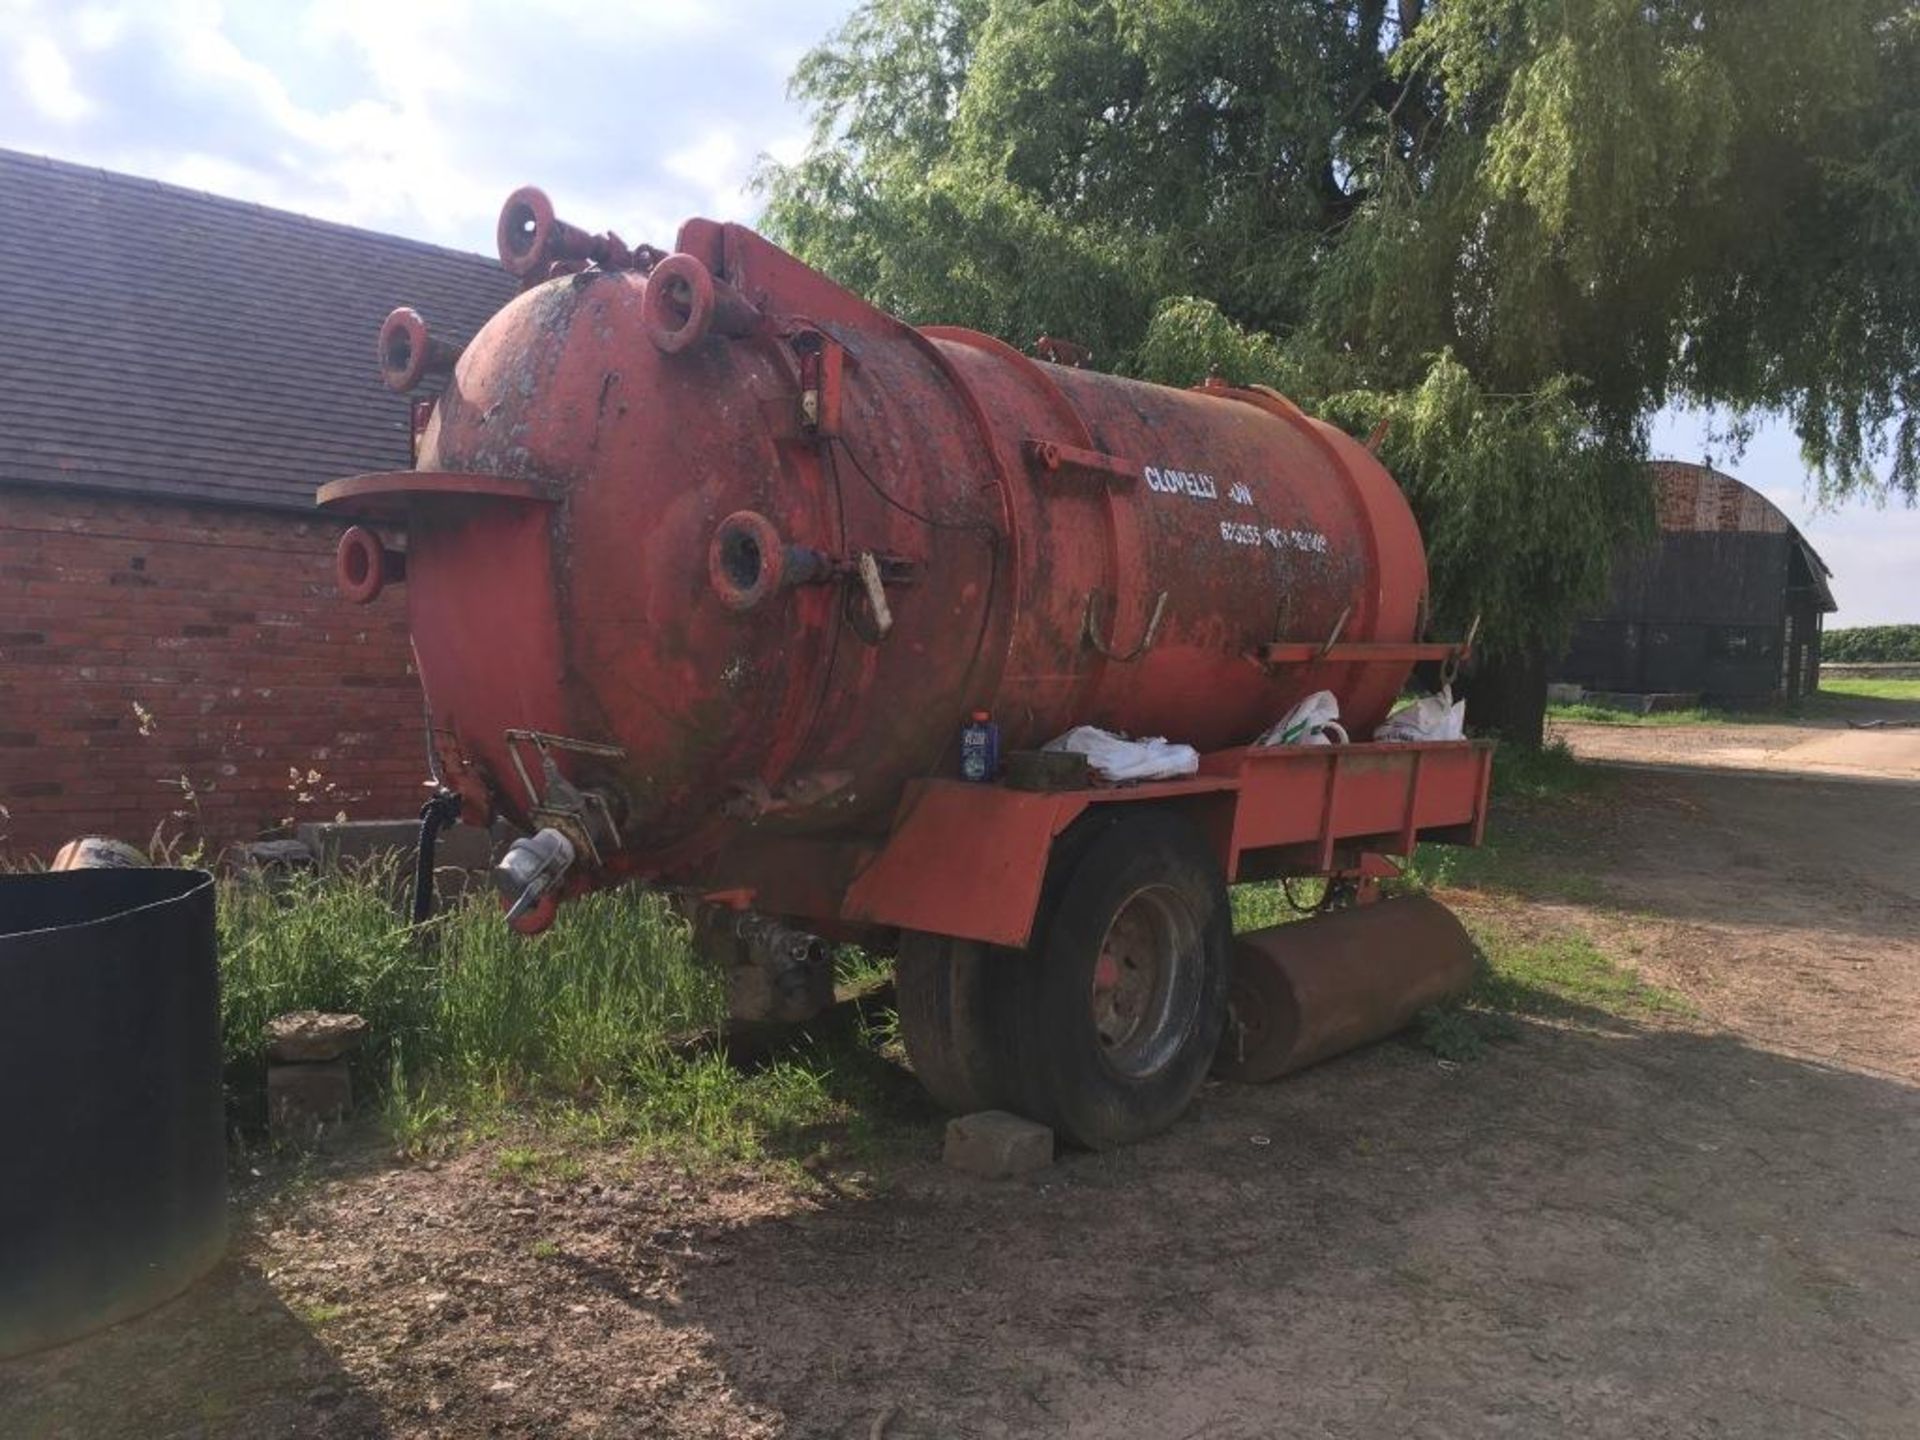 Farm-converted water bowser (ex-slurry tanker) (missing wheel/axle, sold as scrap) - Image 3 of 8